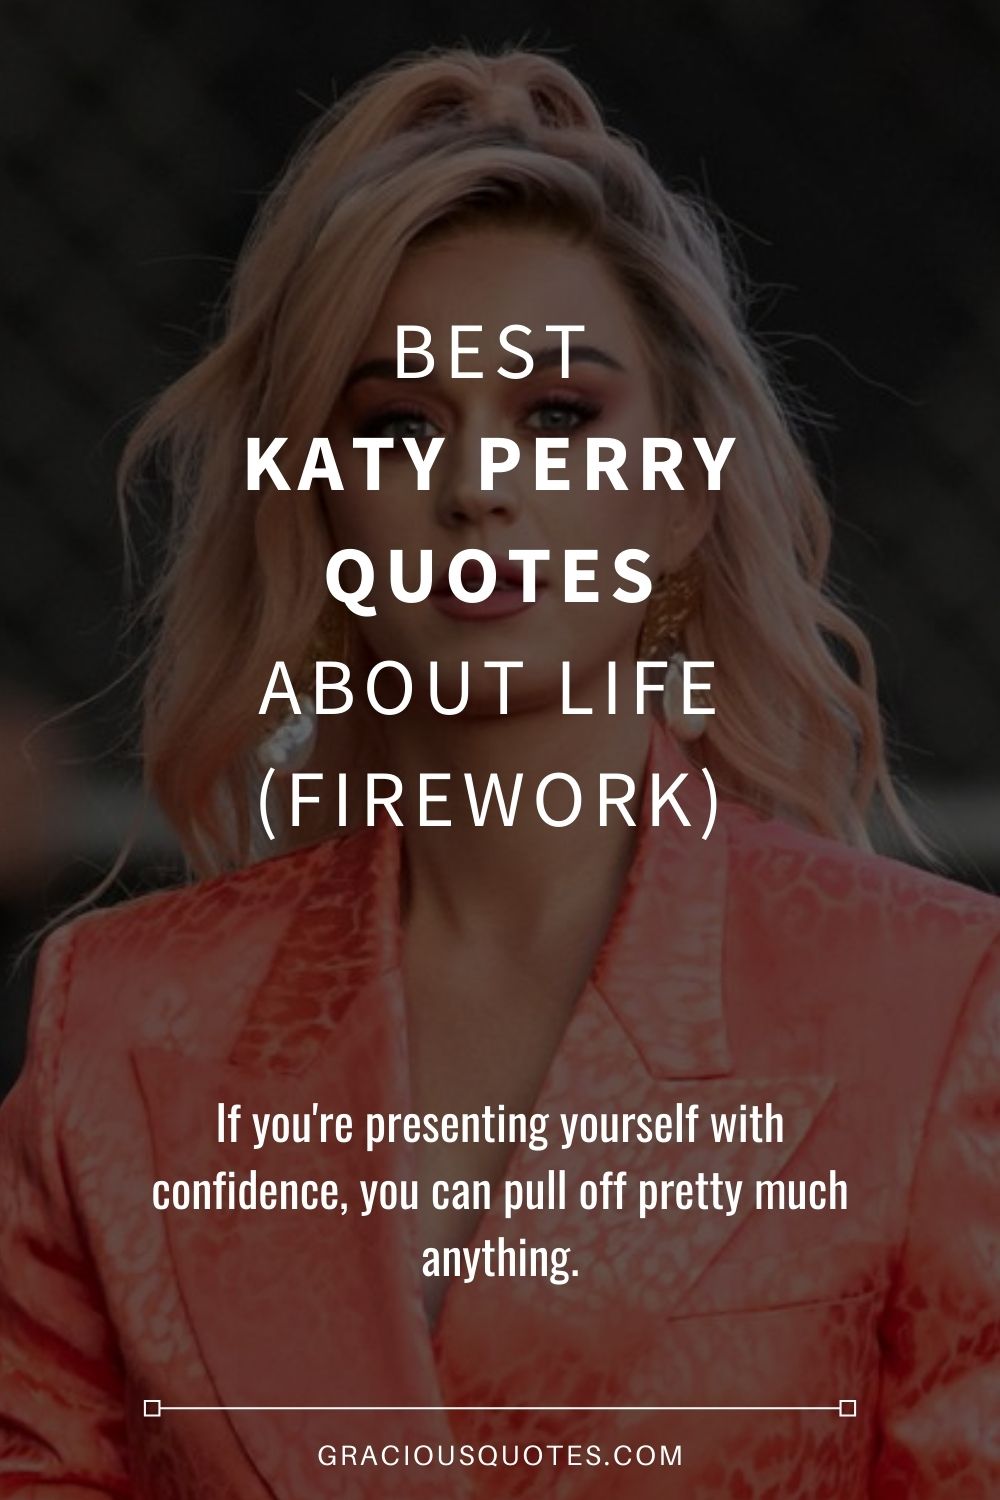 Best Katy Perry Quotes About Life (FIREWORK) - Gracious Quotes